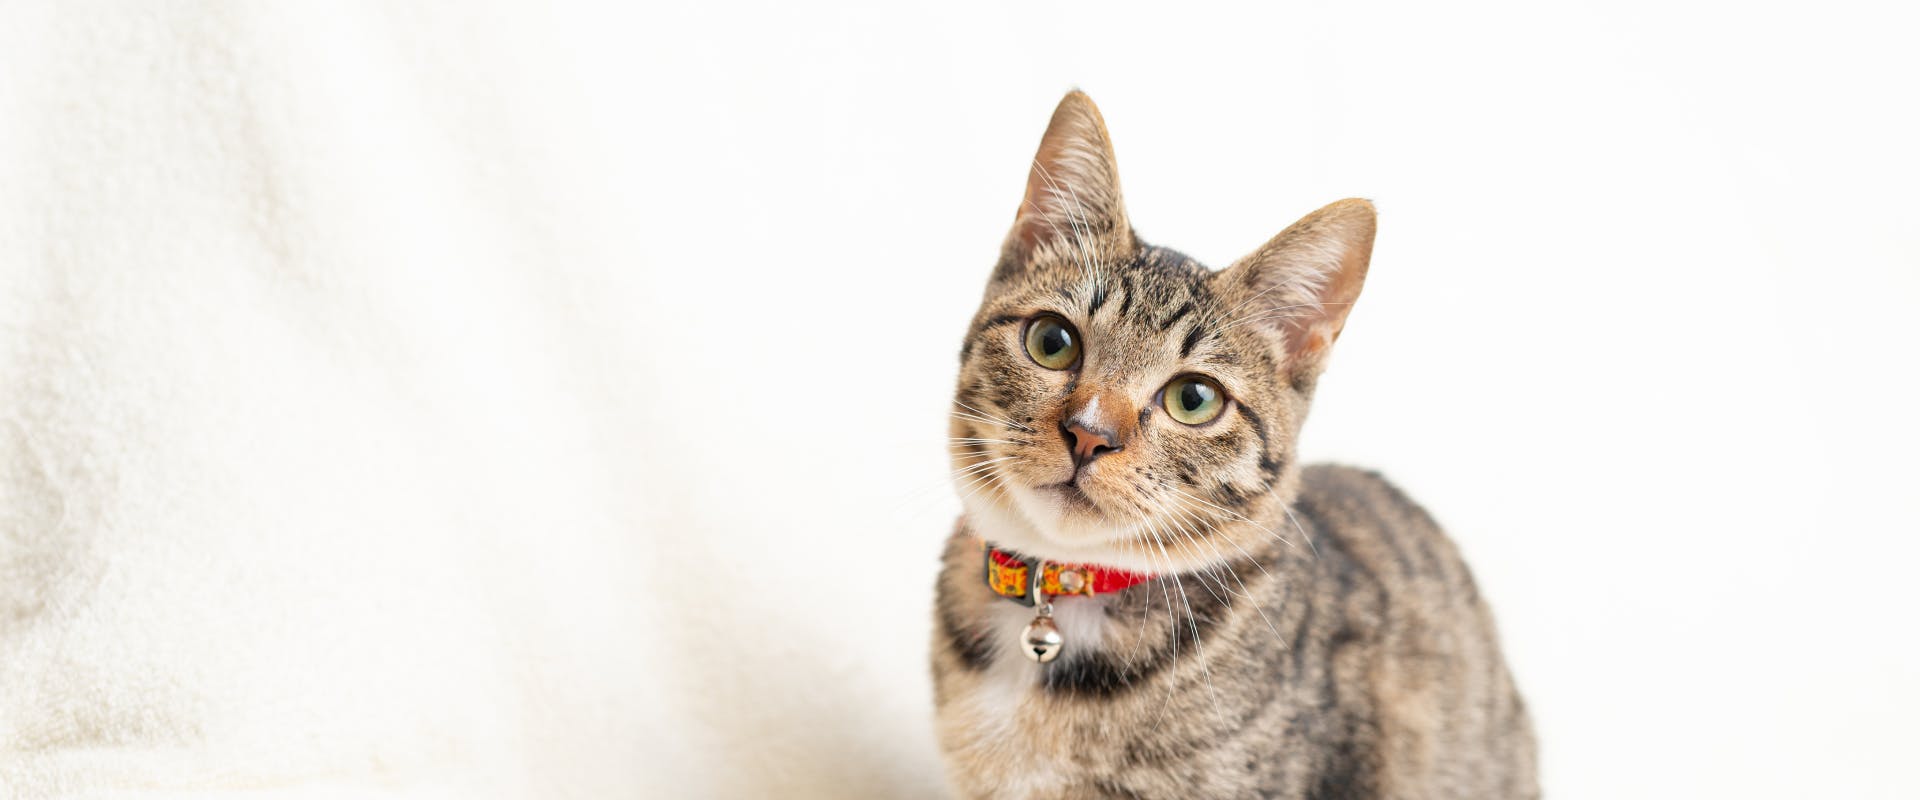 A young cat sits wearing a collar.